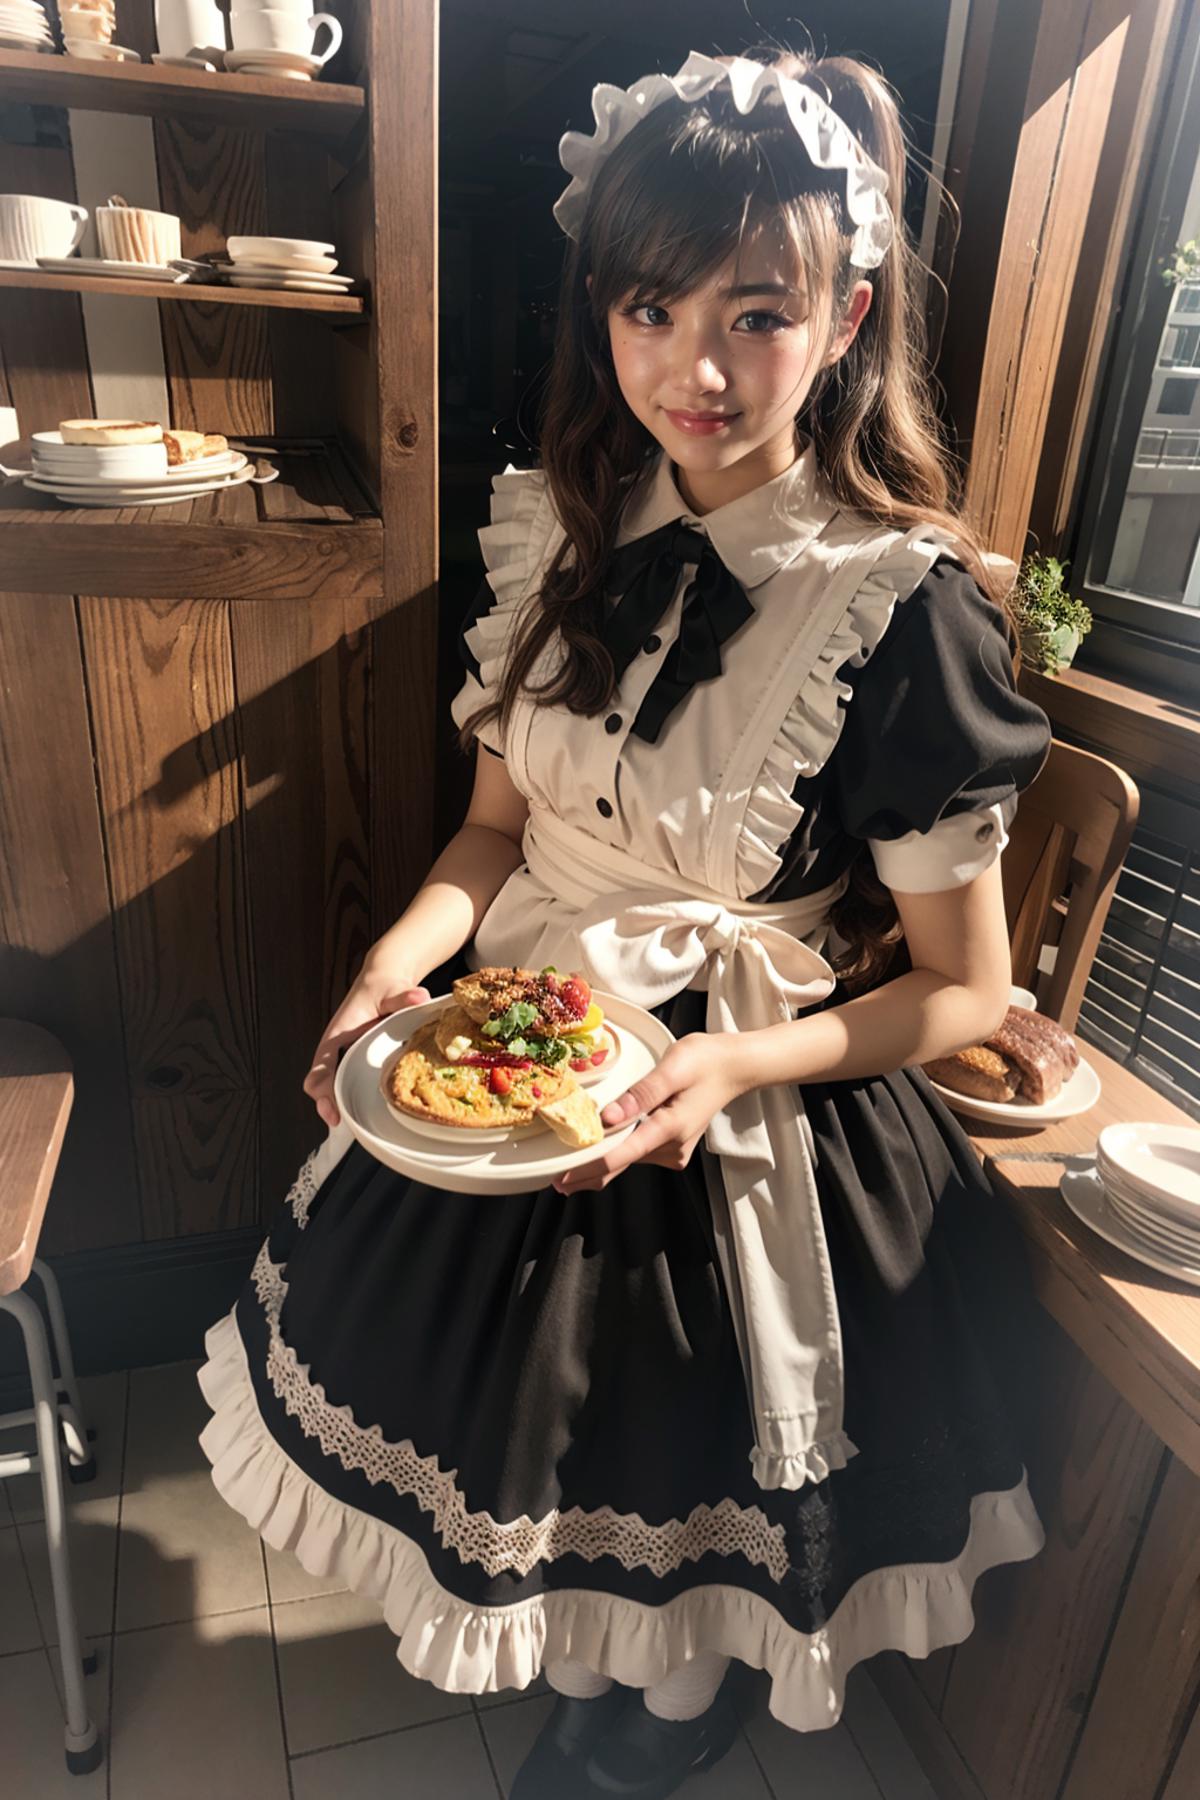 Maid costume | 女仆装 image by feetie